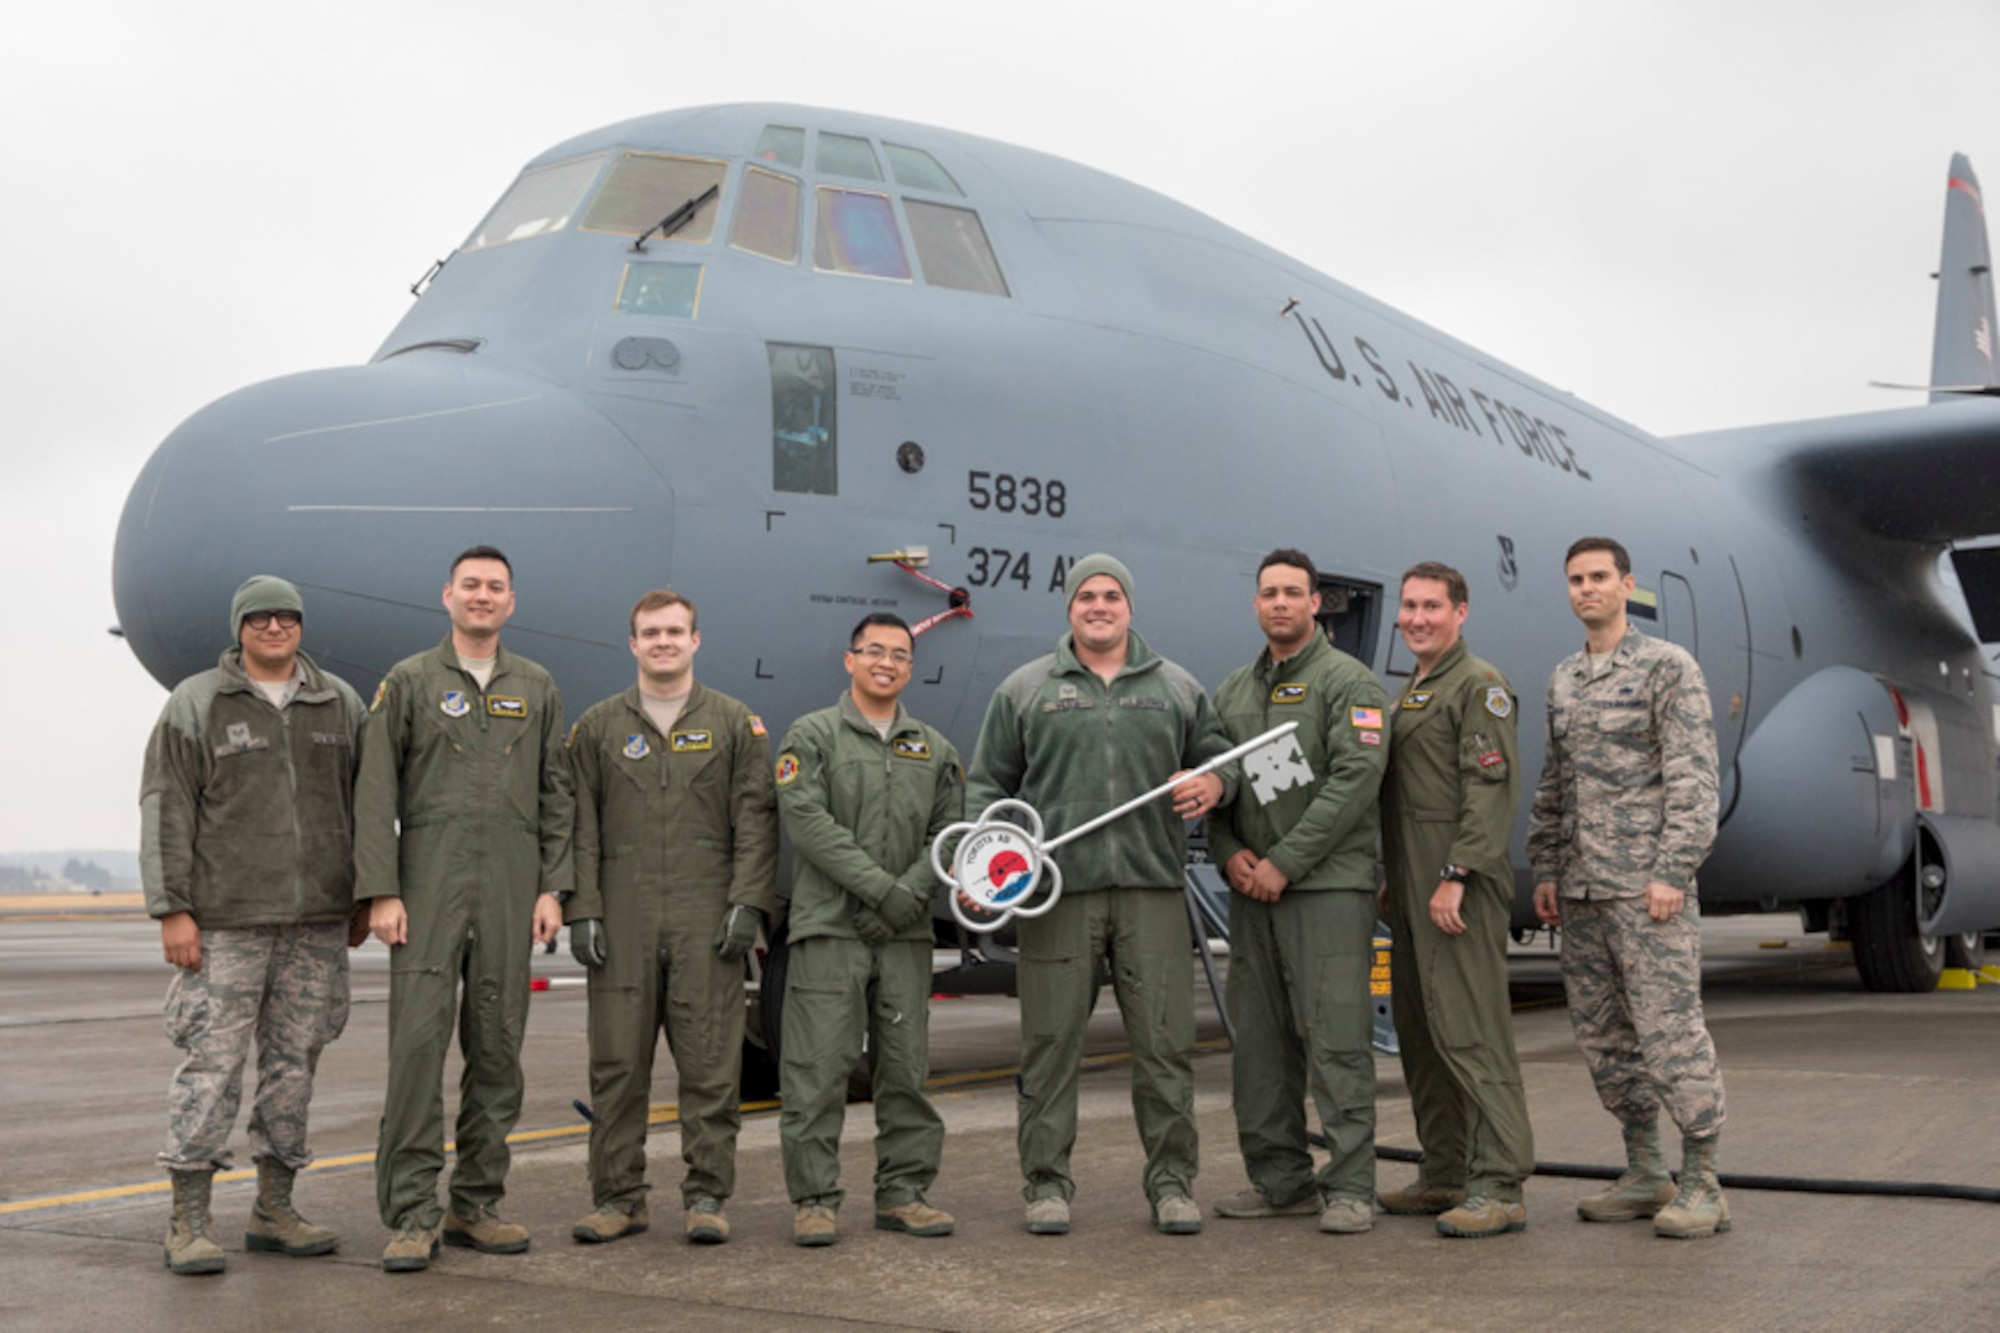 Members of the C-130J Super Hercules number 5838 delivery team pose for a photo